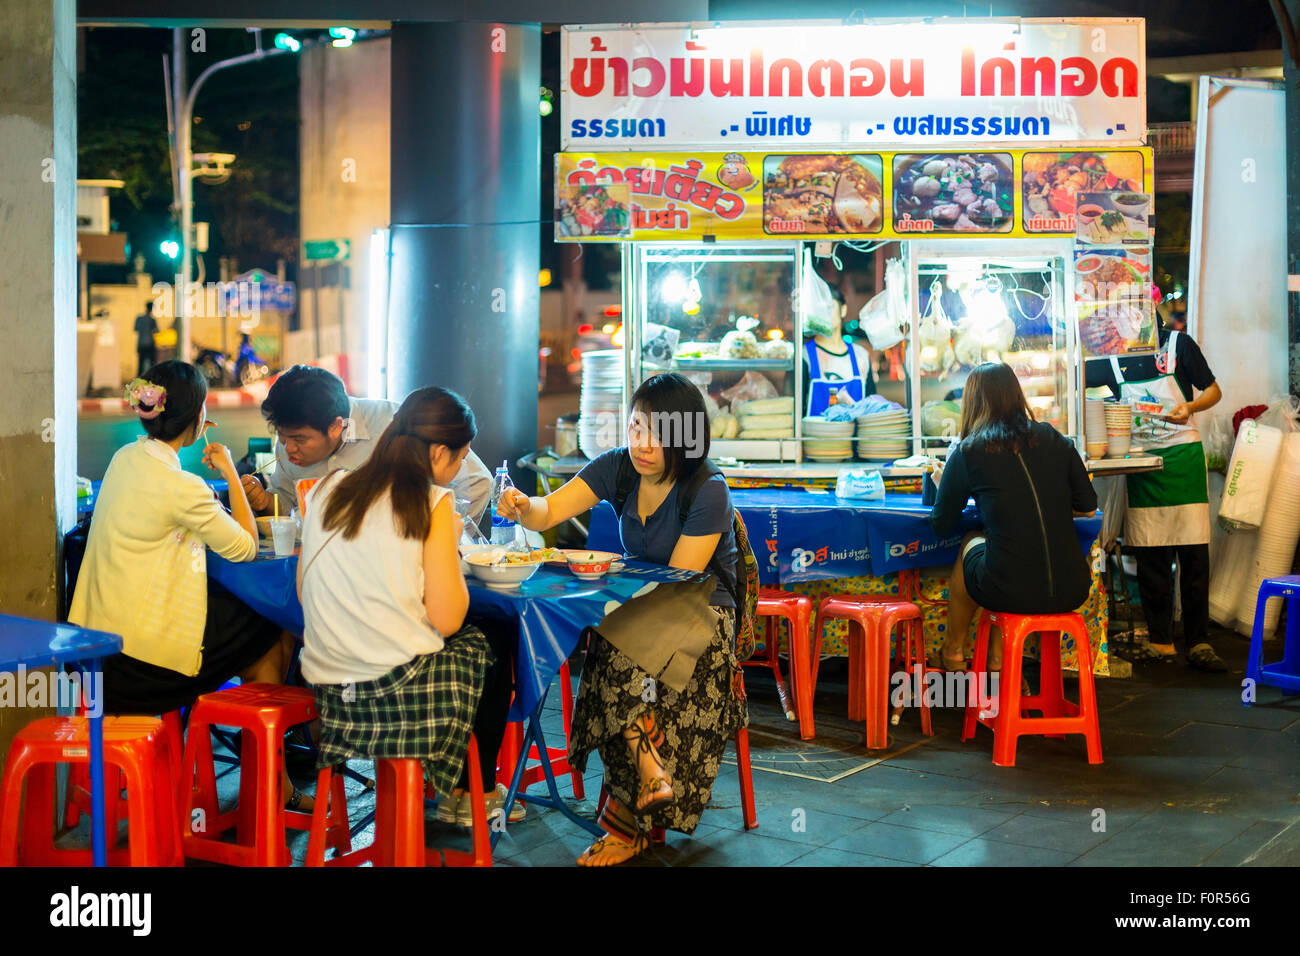 Thailand, Bangkok, People eating in the street Stock Photo